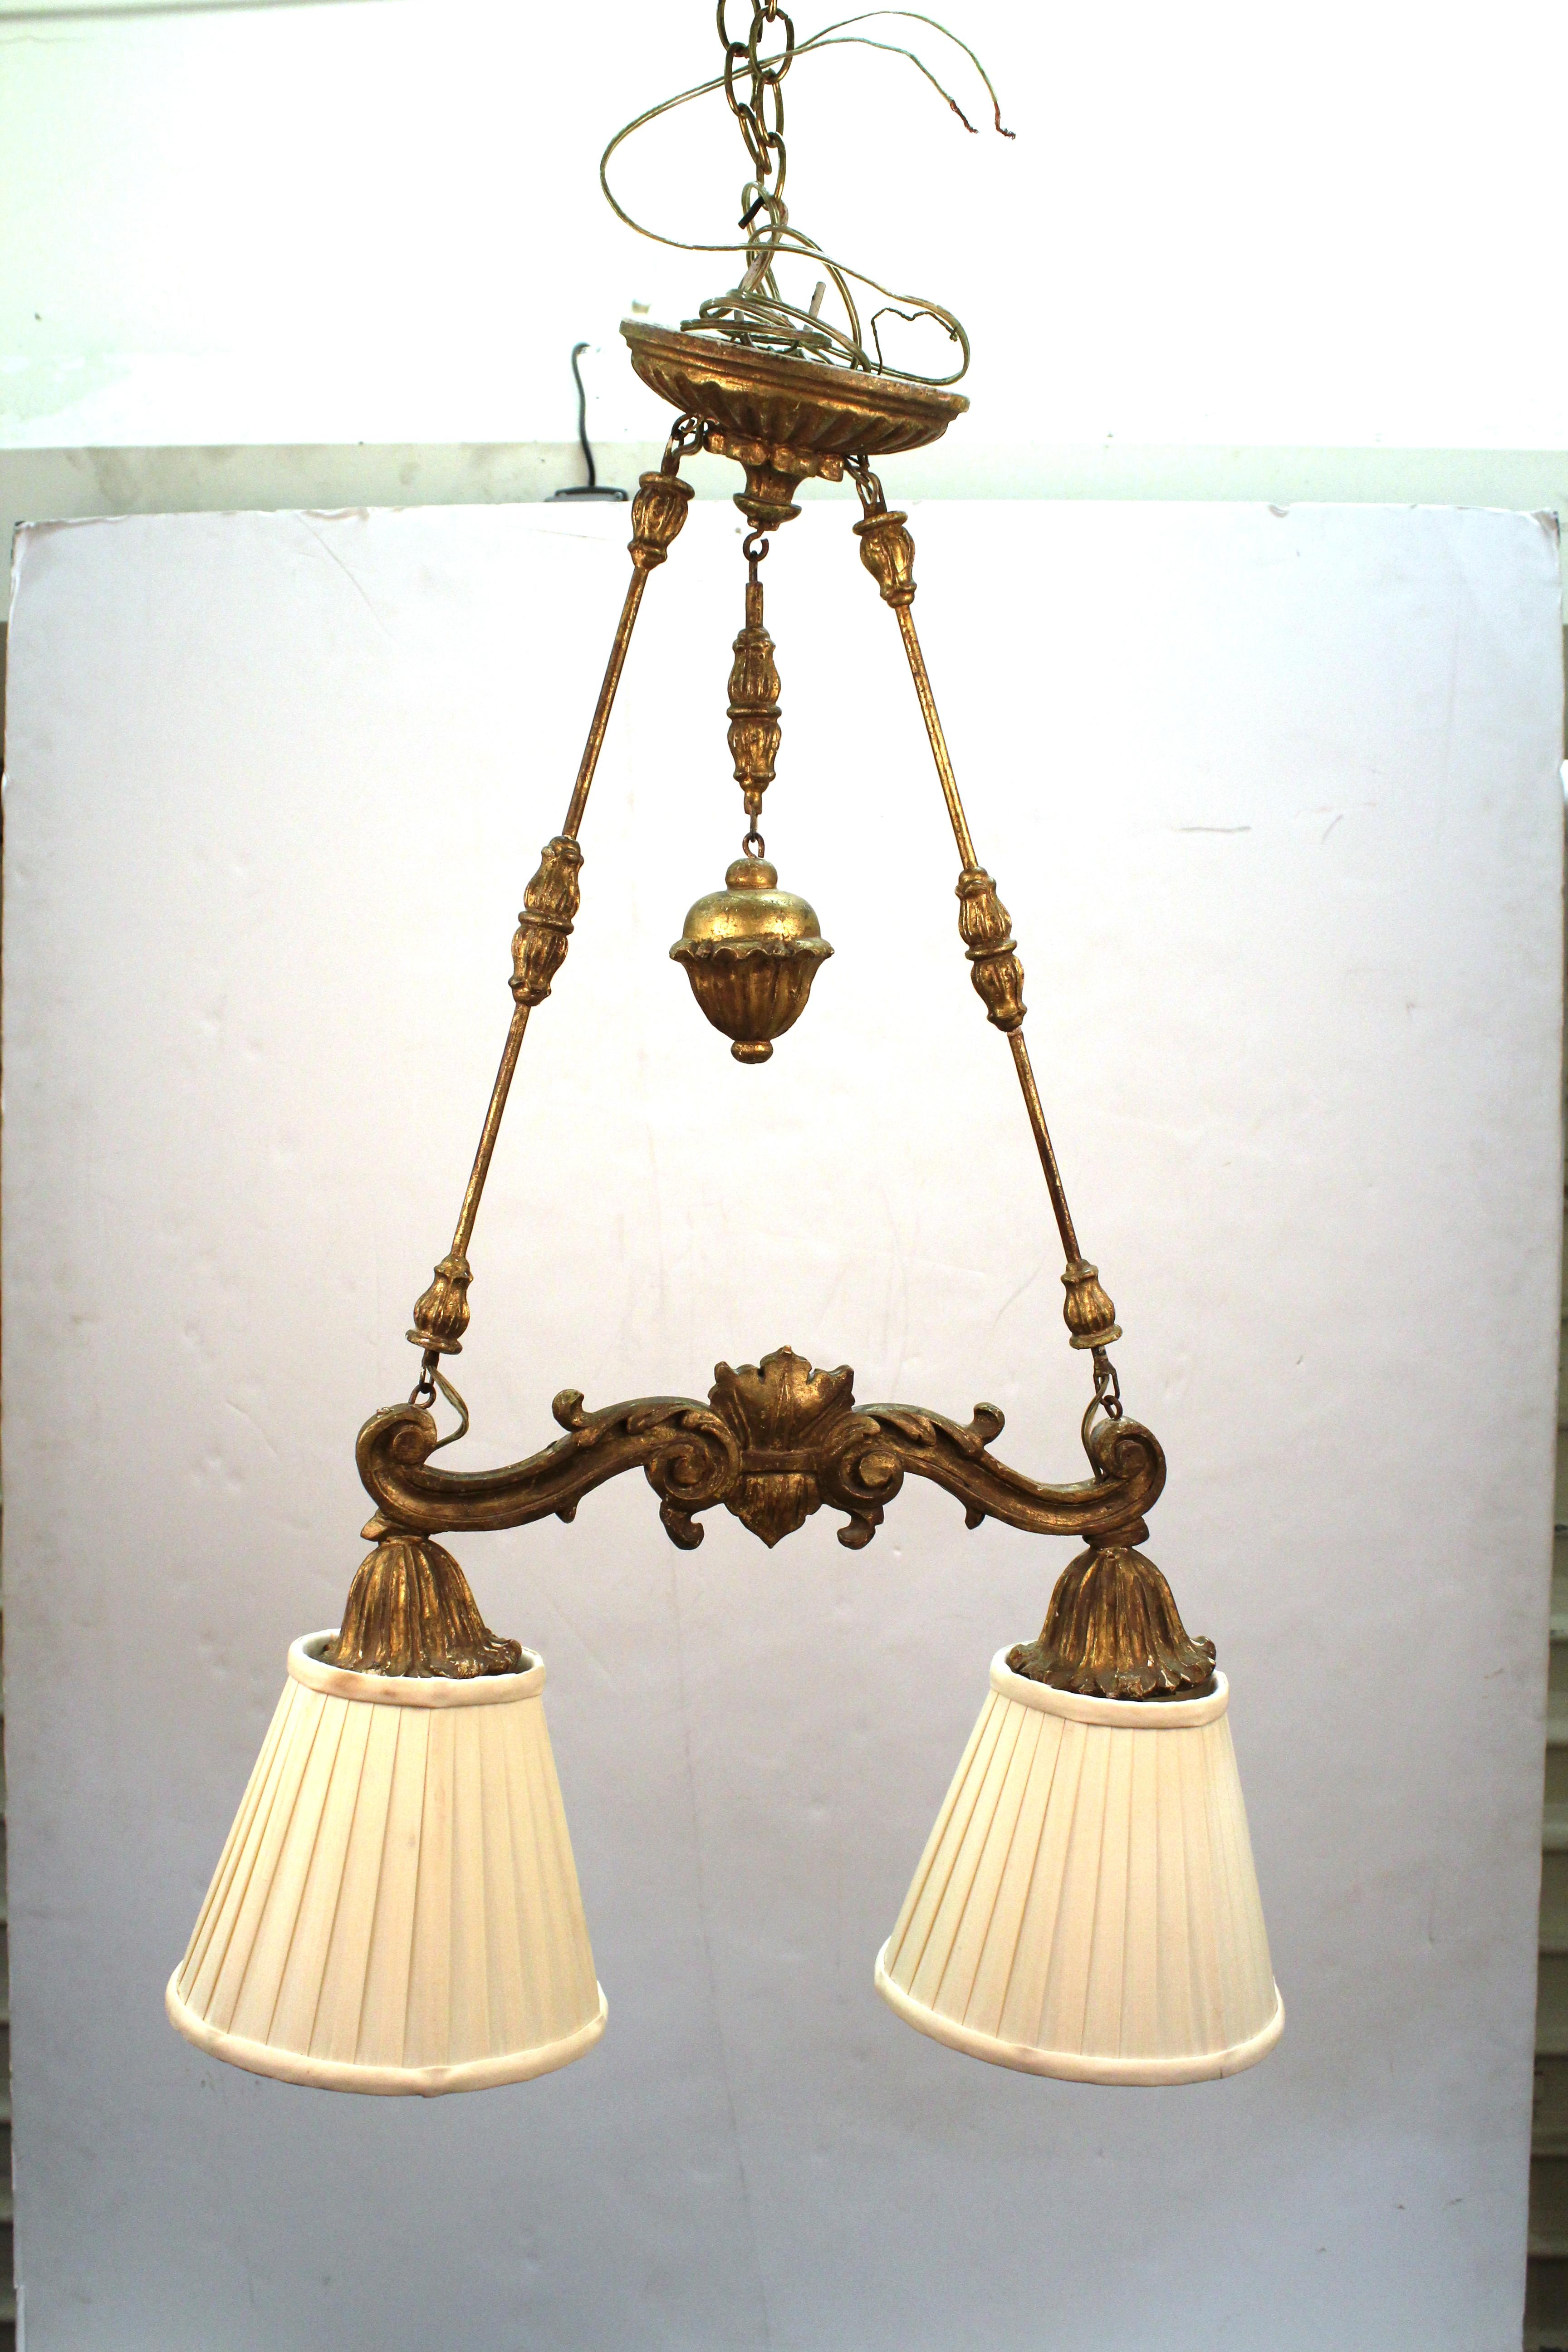 Neoclassical revival gilt wood pendant light chandelier with two shades. The piece was likely made during the late 19th - early 20th Century.

Dealer: S138XX